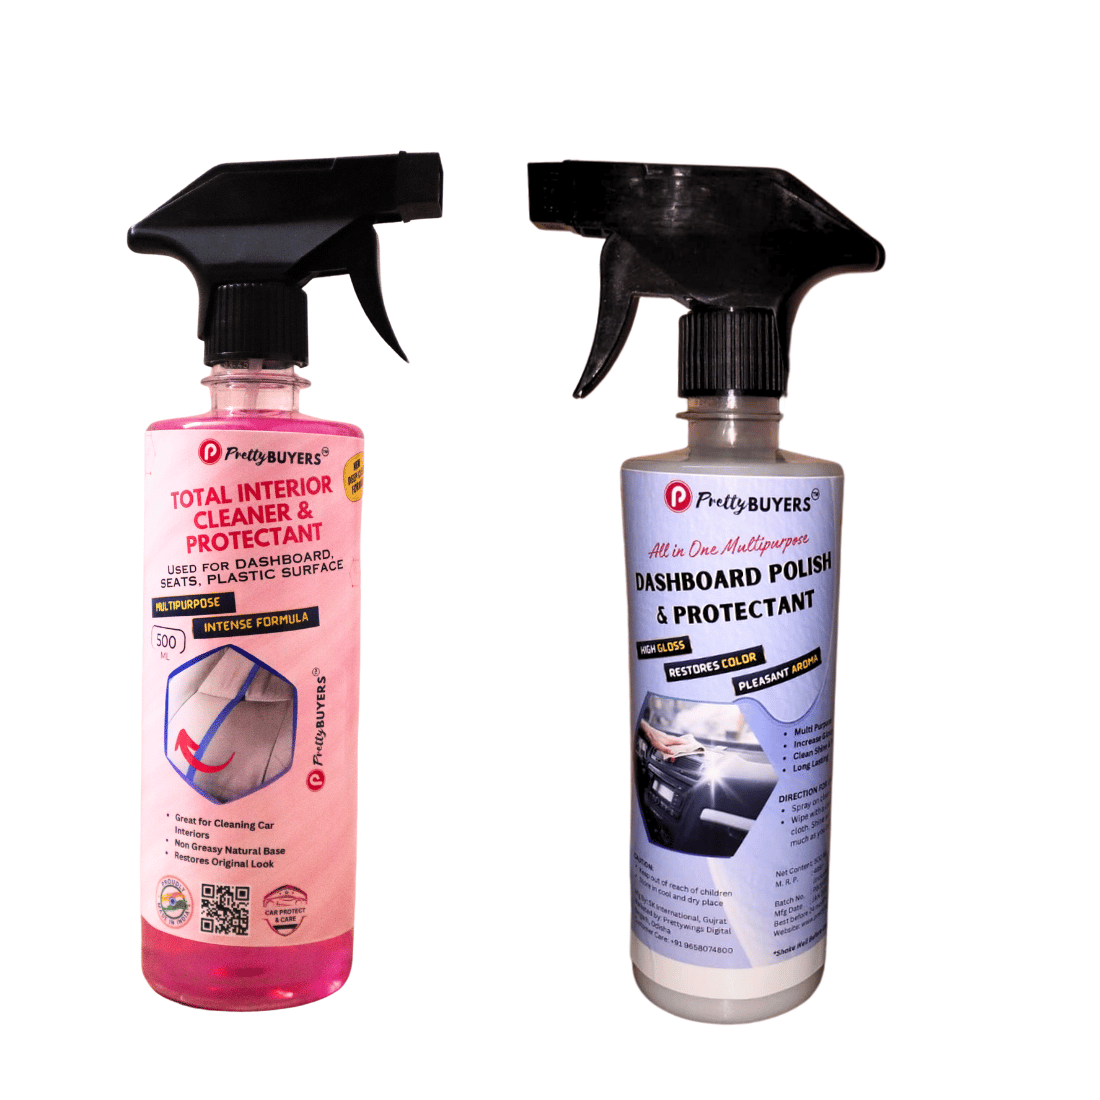 PrettyBUYERS Multipurpose Car Interior Cleaner & Dashboard Polish and Protectant Spray 500 ml Each